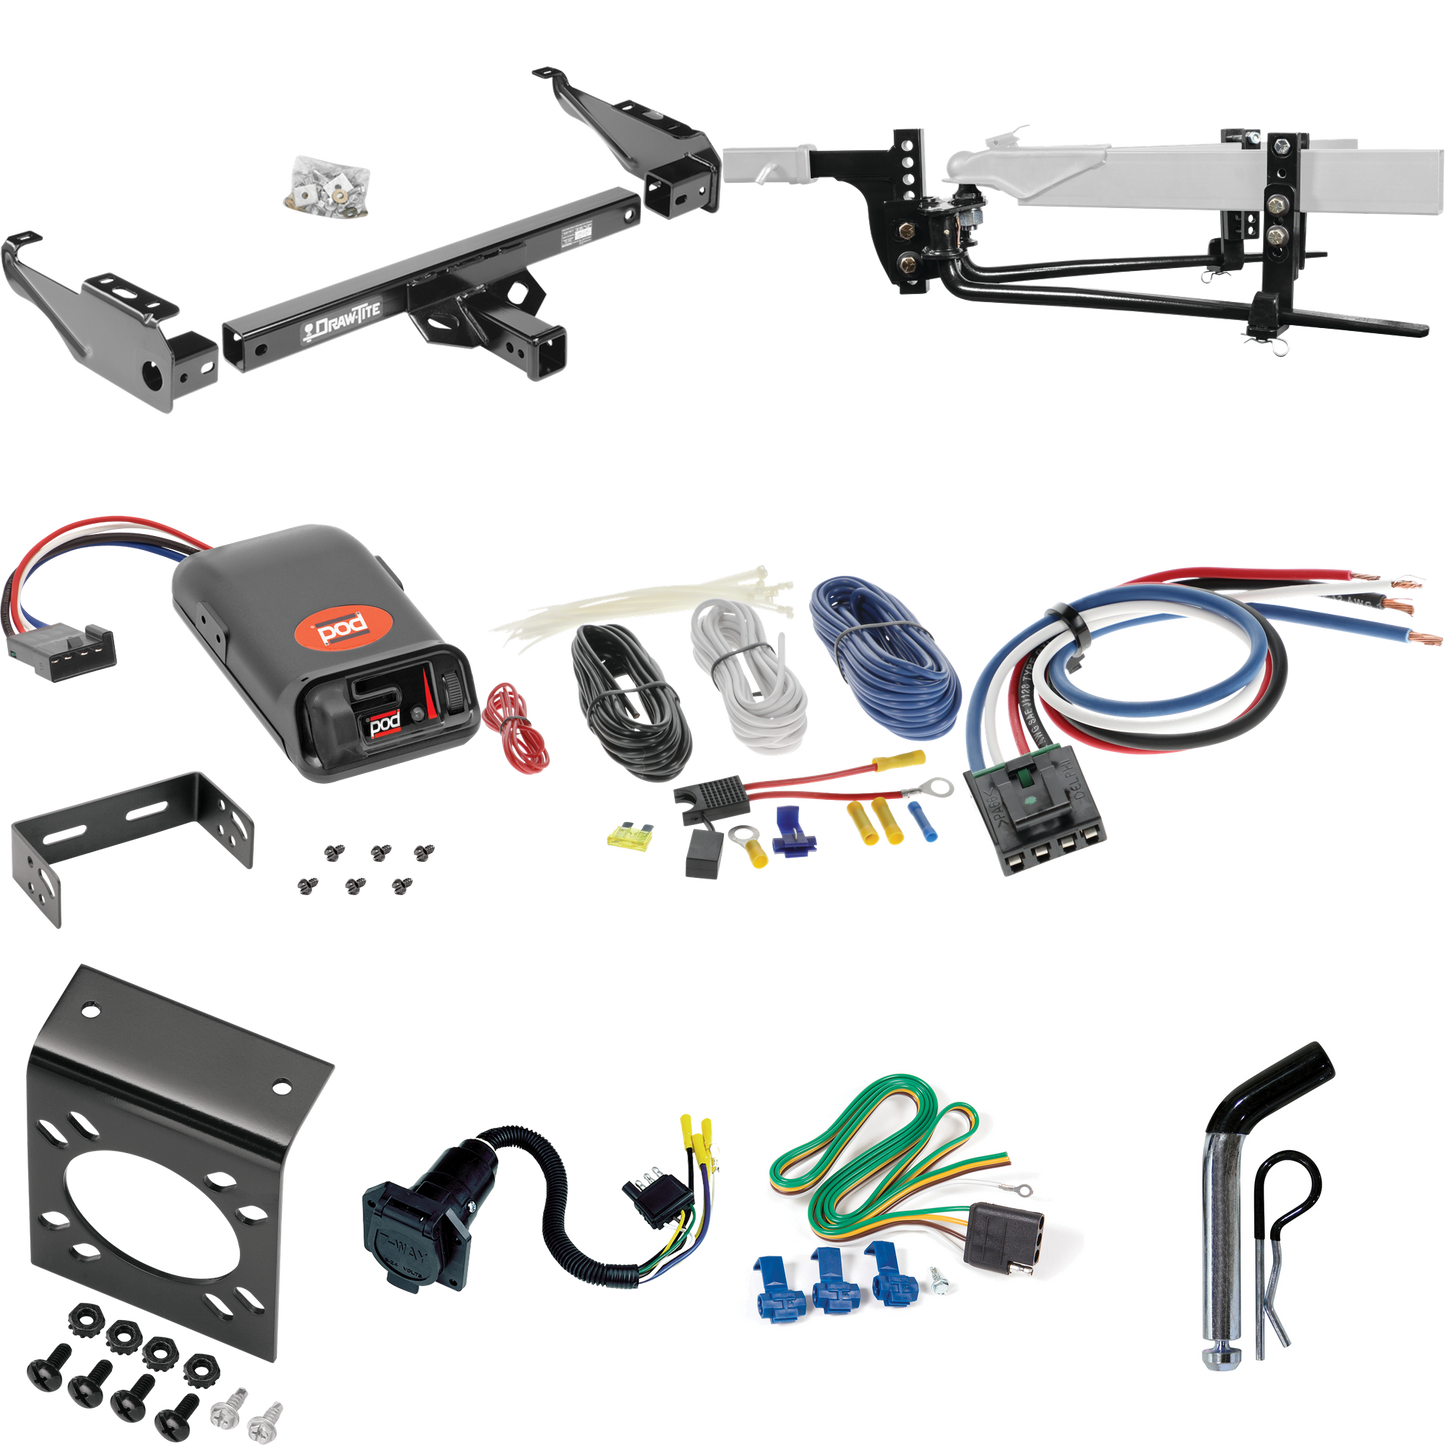 Fits 1963-1966 GMC 3500 Trailer Hitch Tow PKG w/ 11.5K Round Bar Weight Distribution Hitch w/ 2-5/16" Ball + Pin/Clip + Pro Series POD Brake Control + Generic BC Wiring Adapter + 7-Way RV Wiring By Draw-Tite